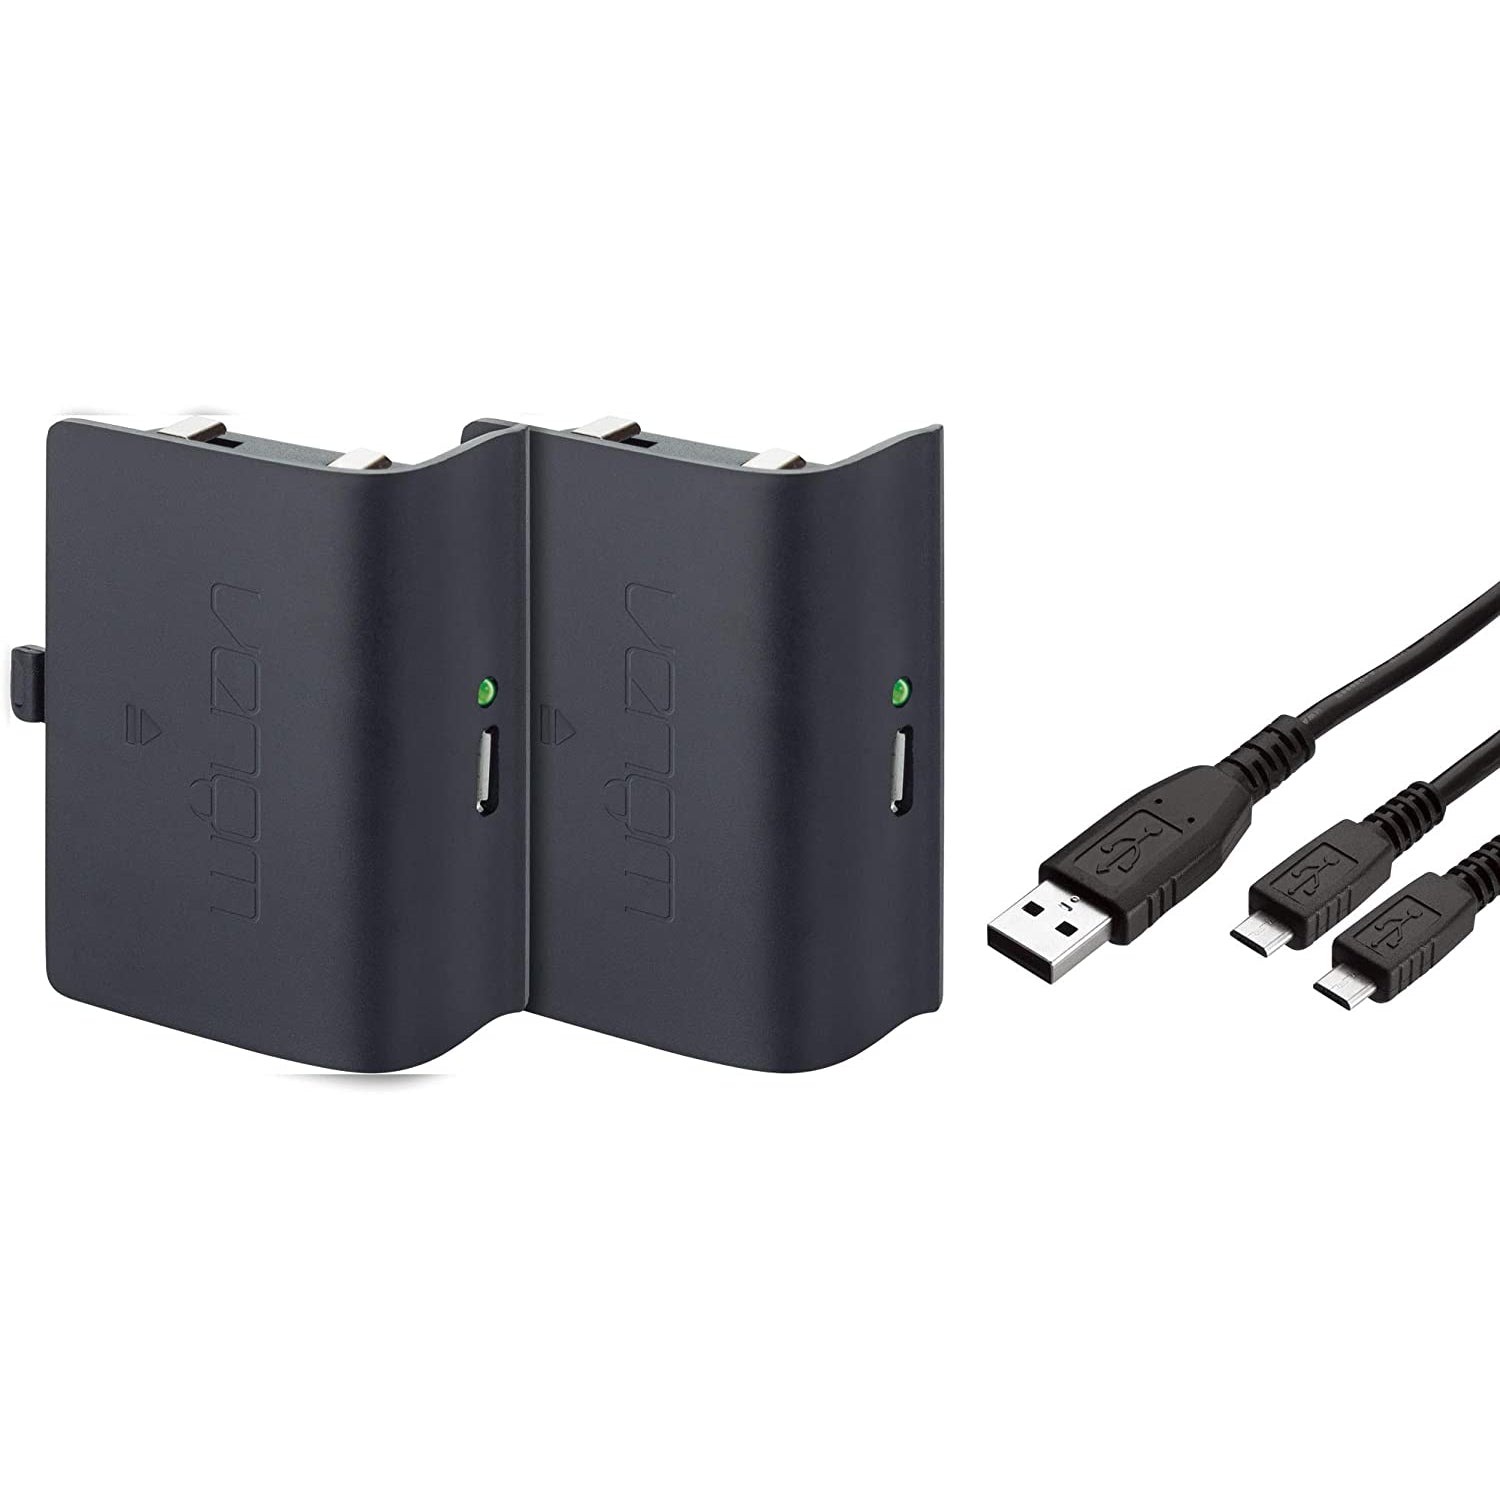 Venom VS2850 Twin Rechargeable Battery Packs for Xbox One - Faulty Wireless Adapter